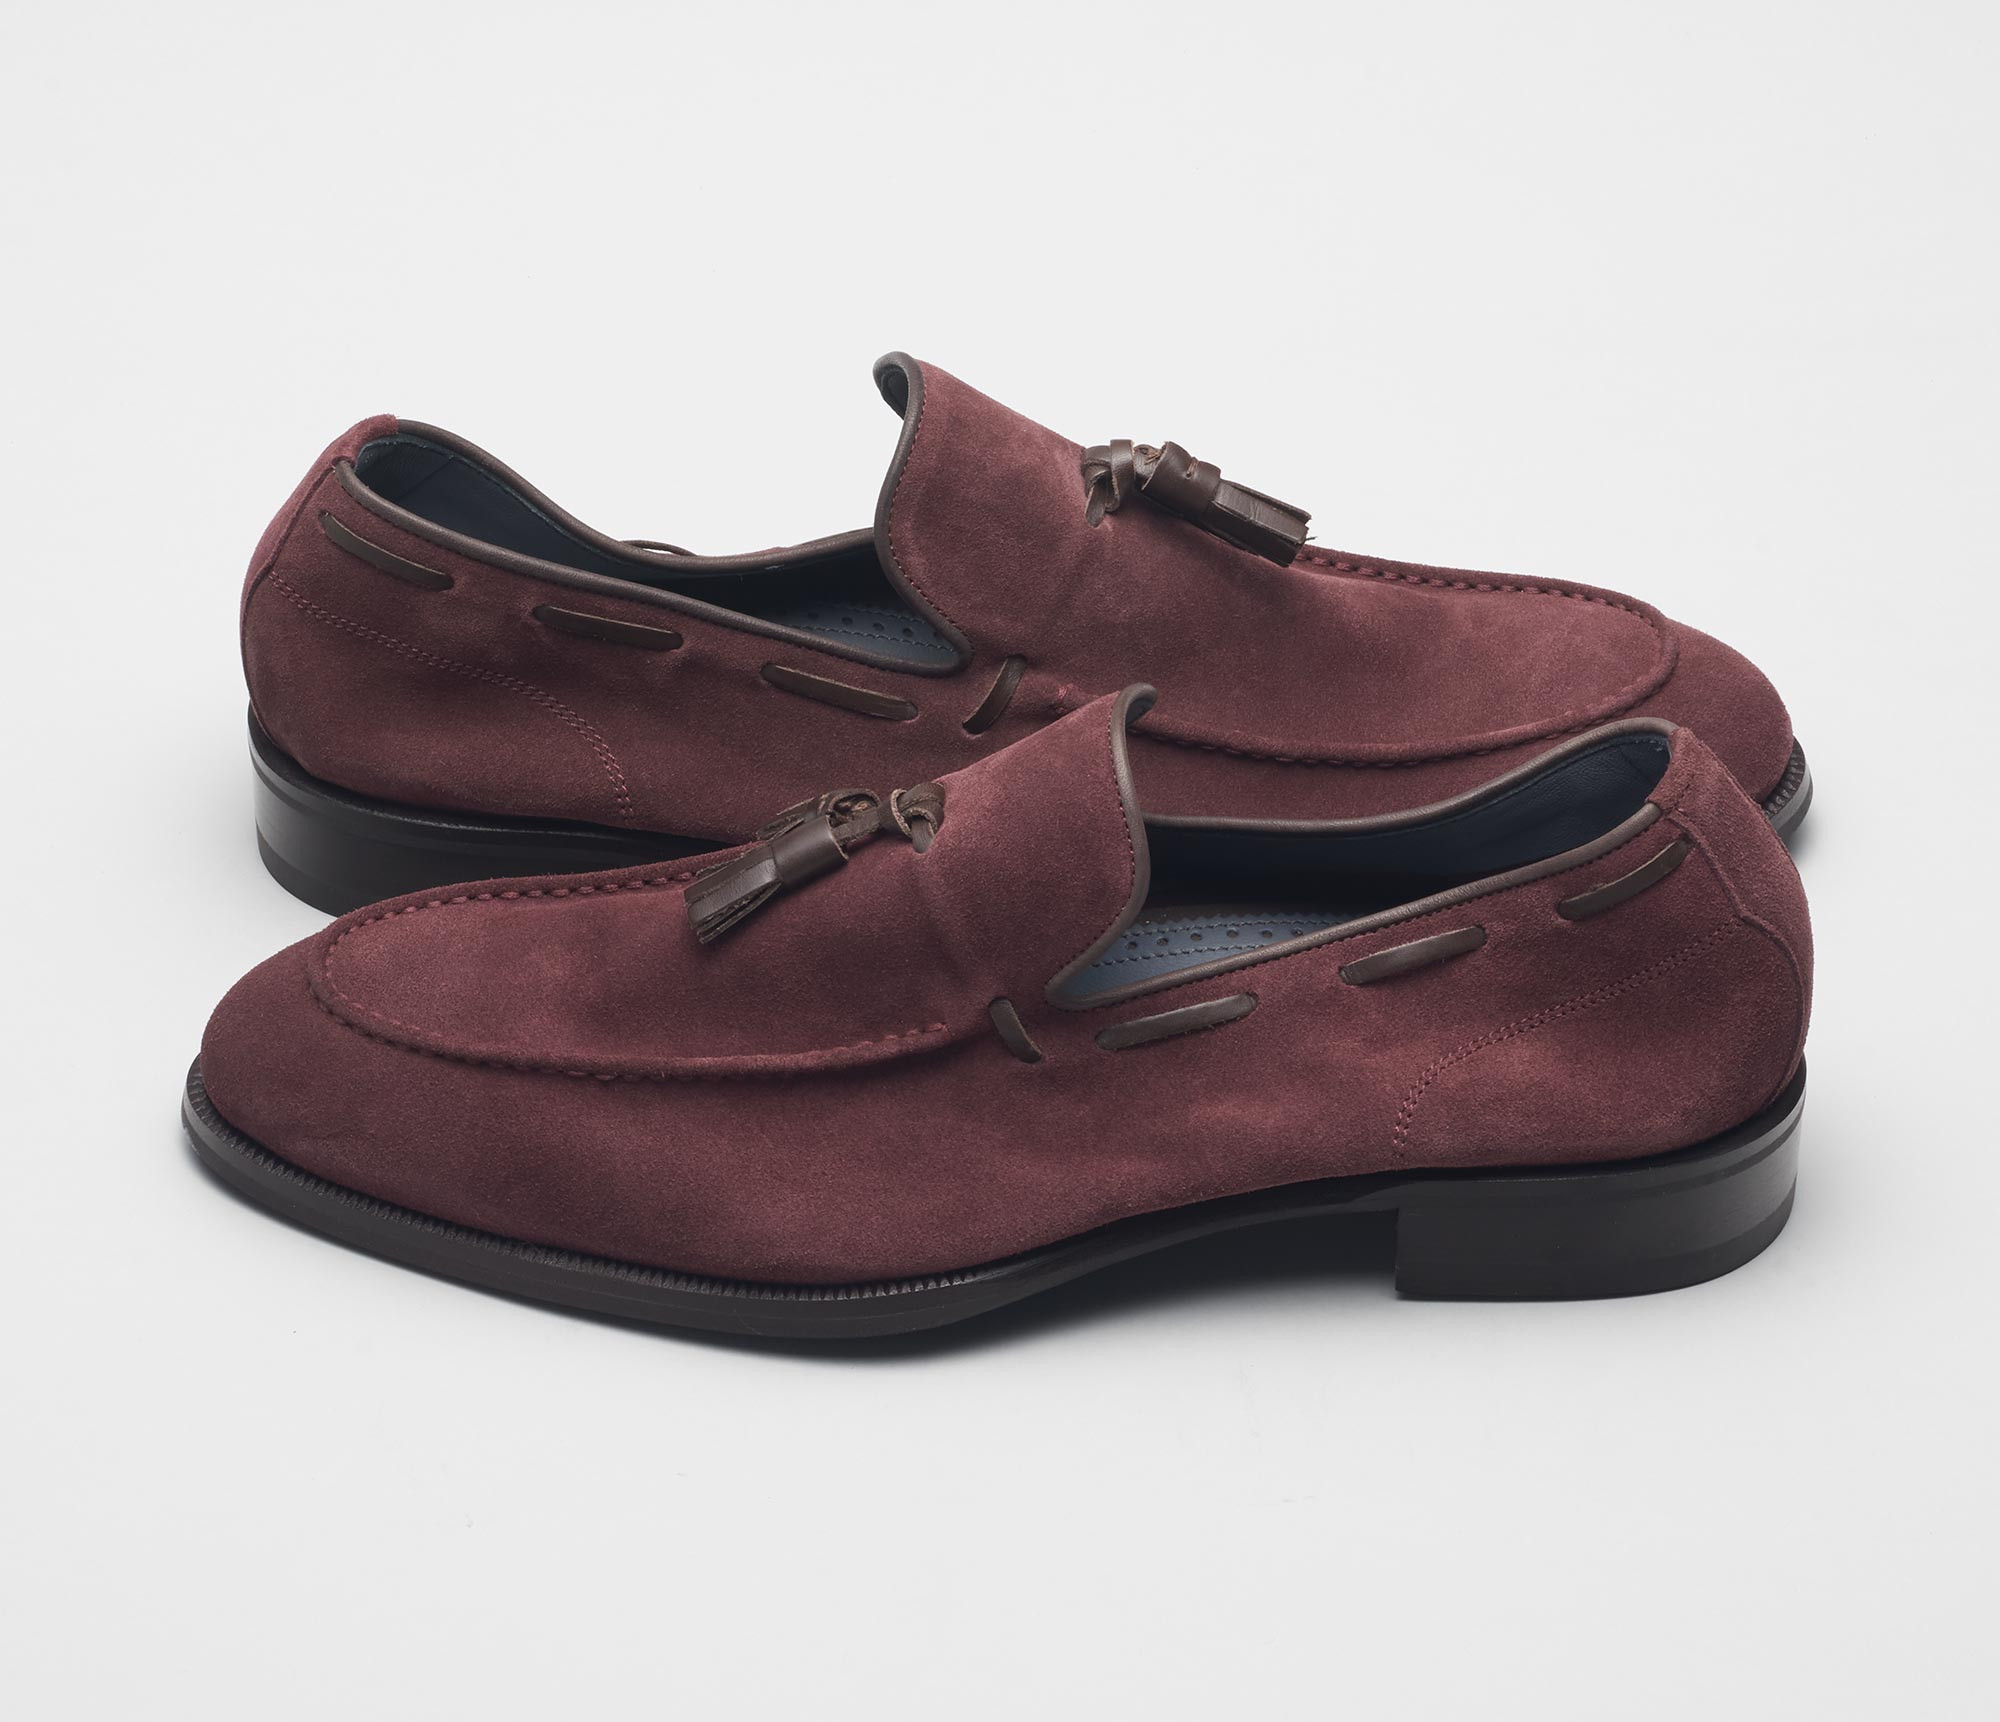 Napoli Suede Loafer in Anima